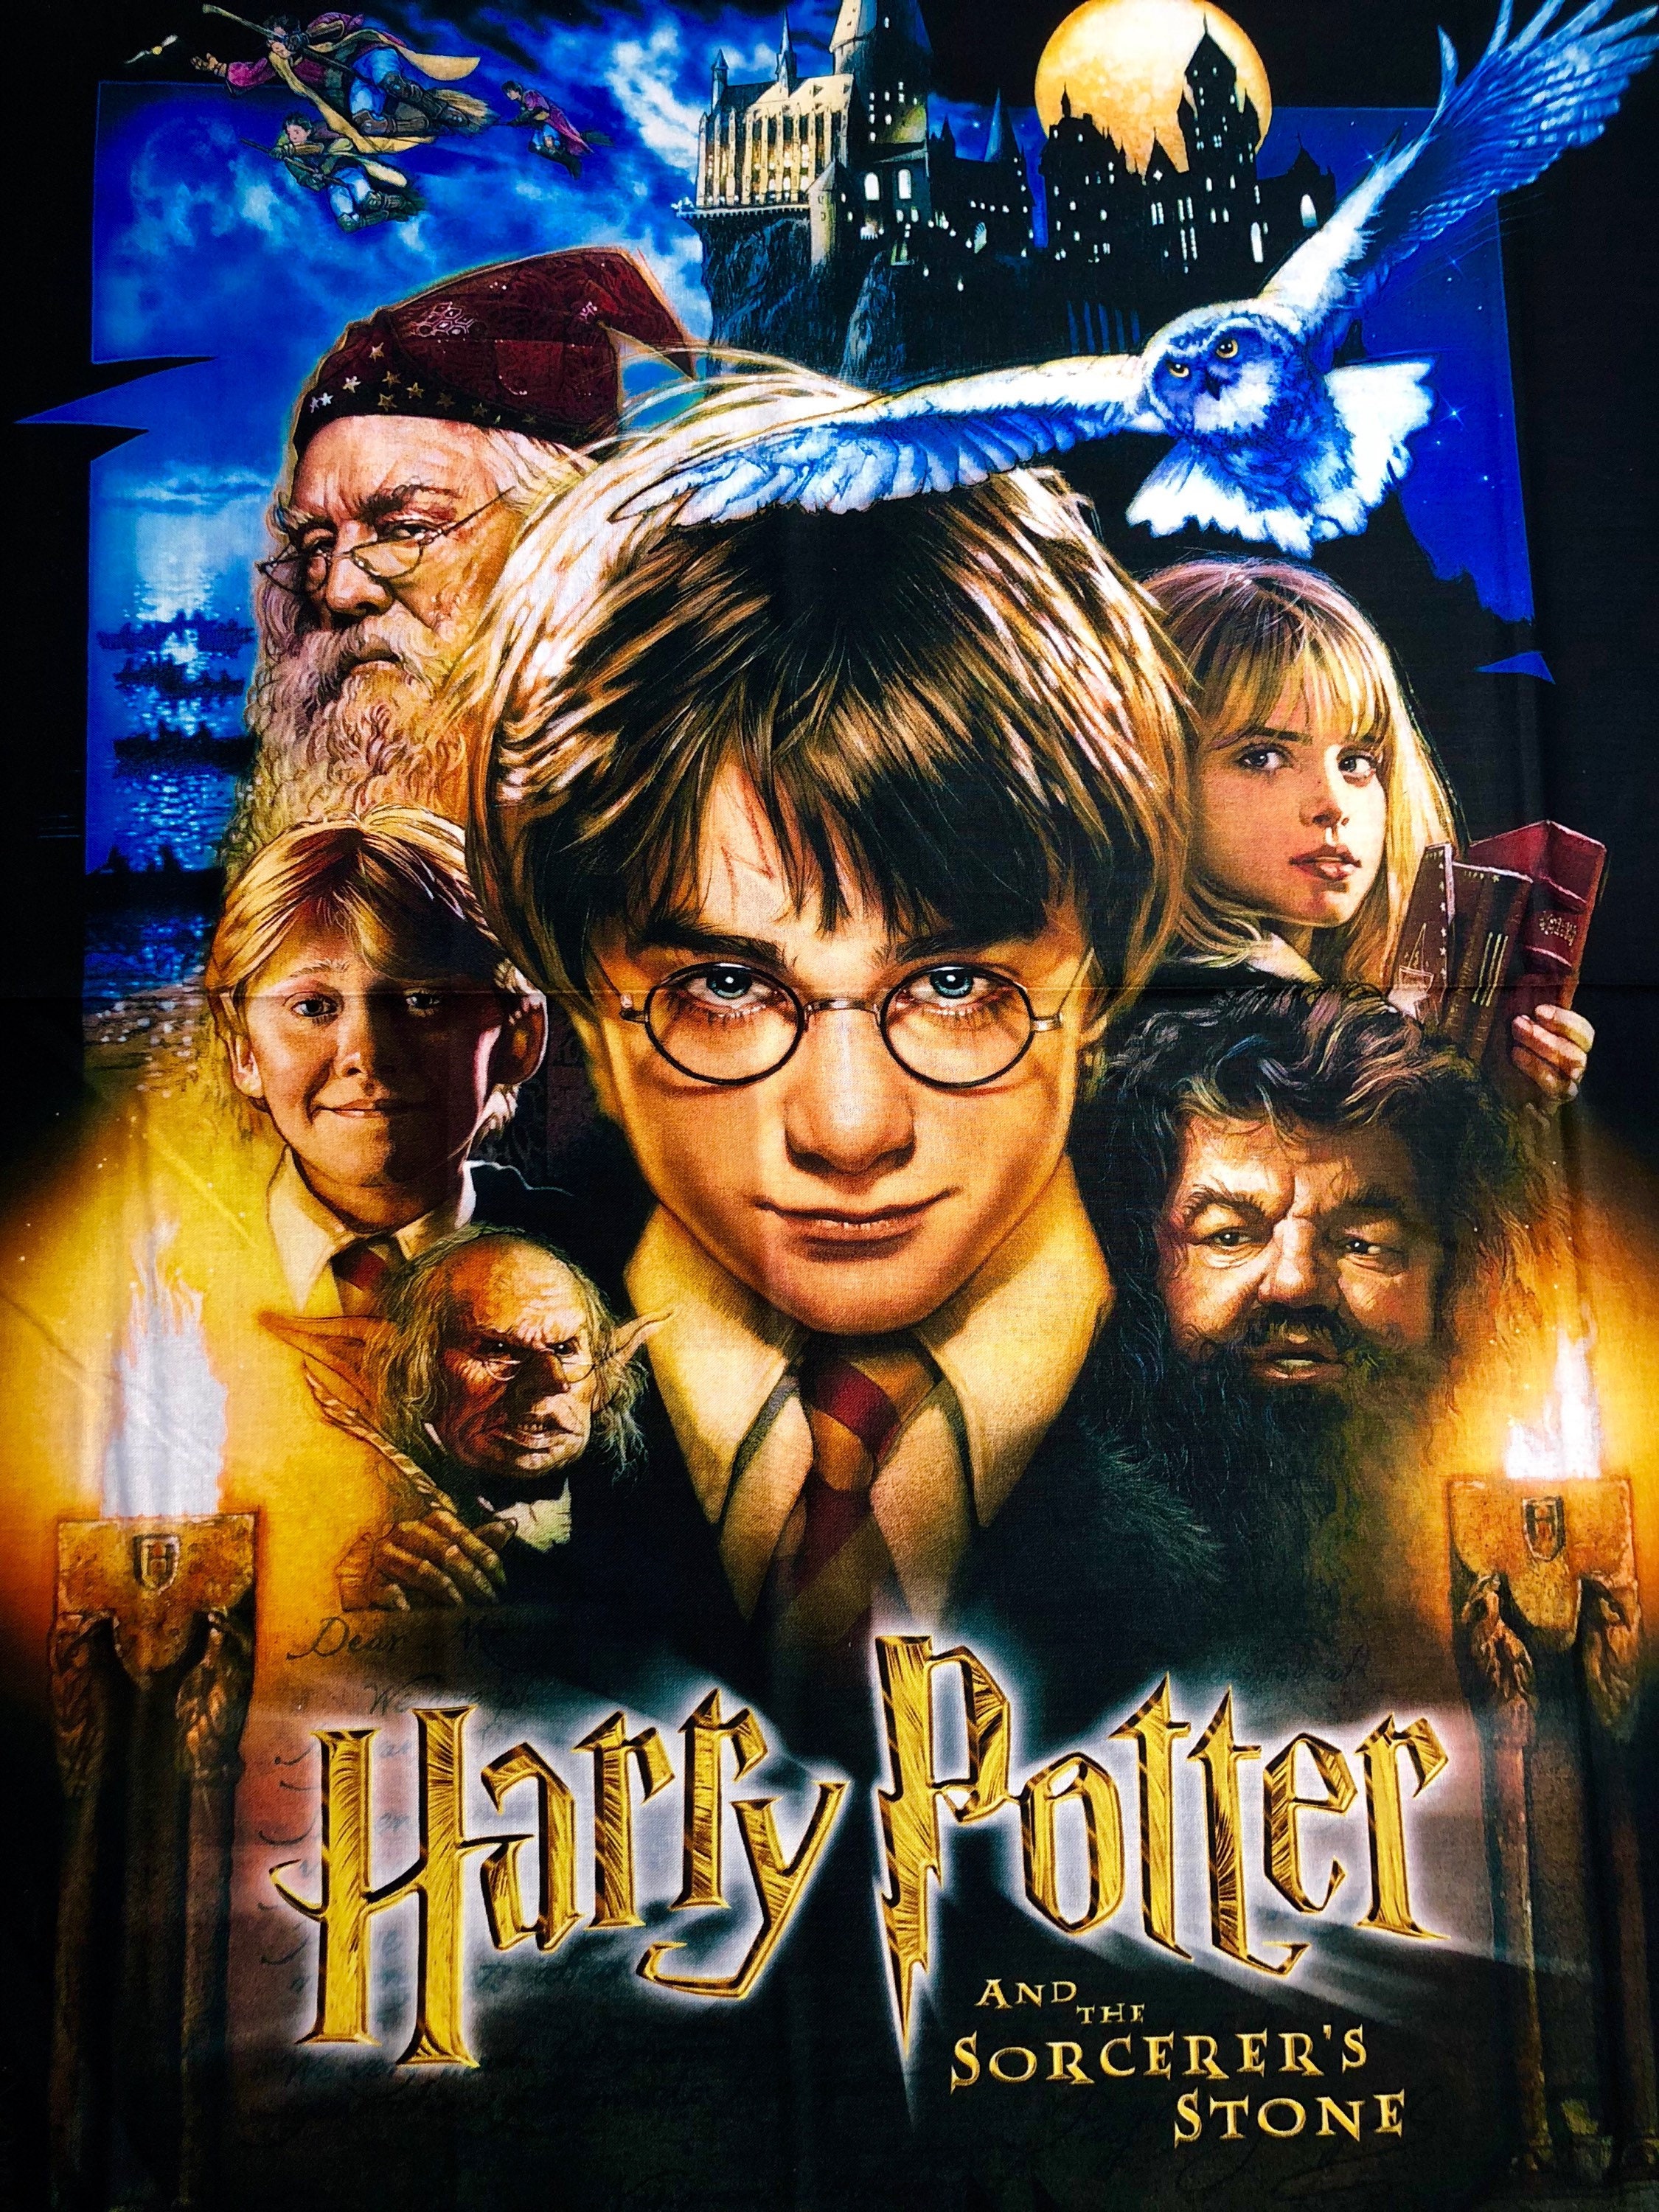 [FlixFling] Harry Potter and the Sorcerer's Stone Watch - Pedro Barnes - Harry Potter And Sorcerer's Stone Full Movie Watch Online